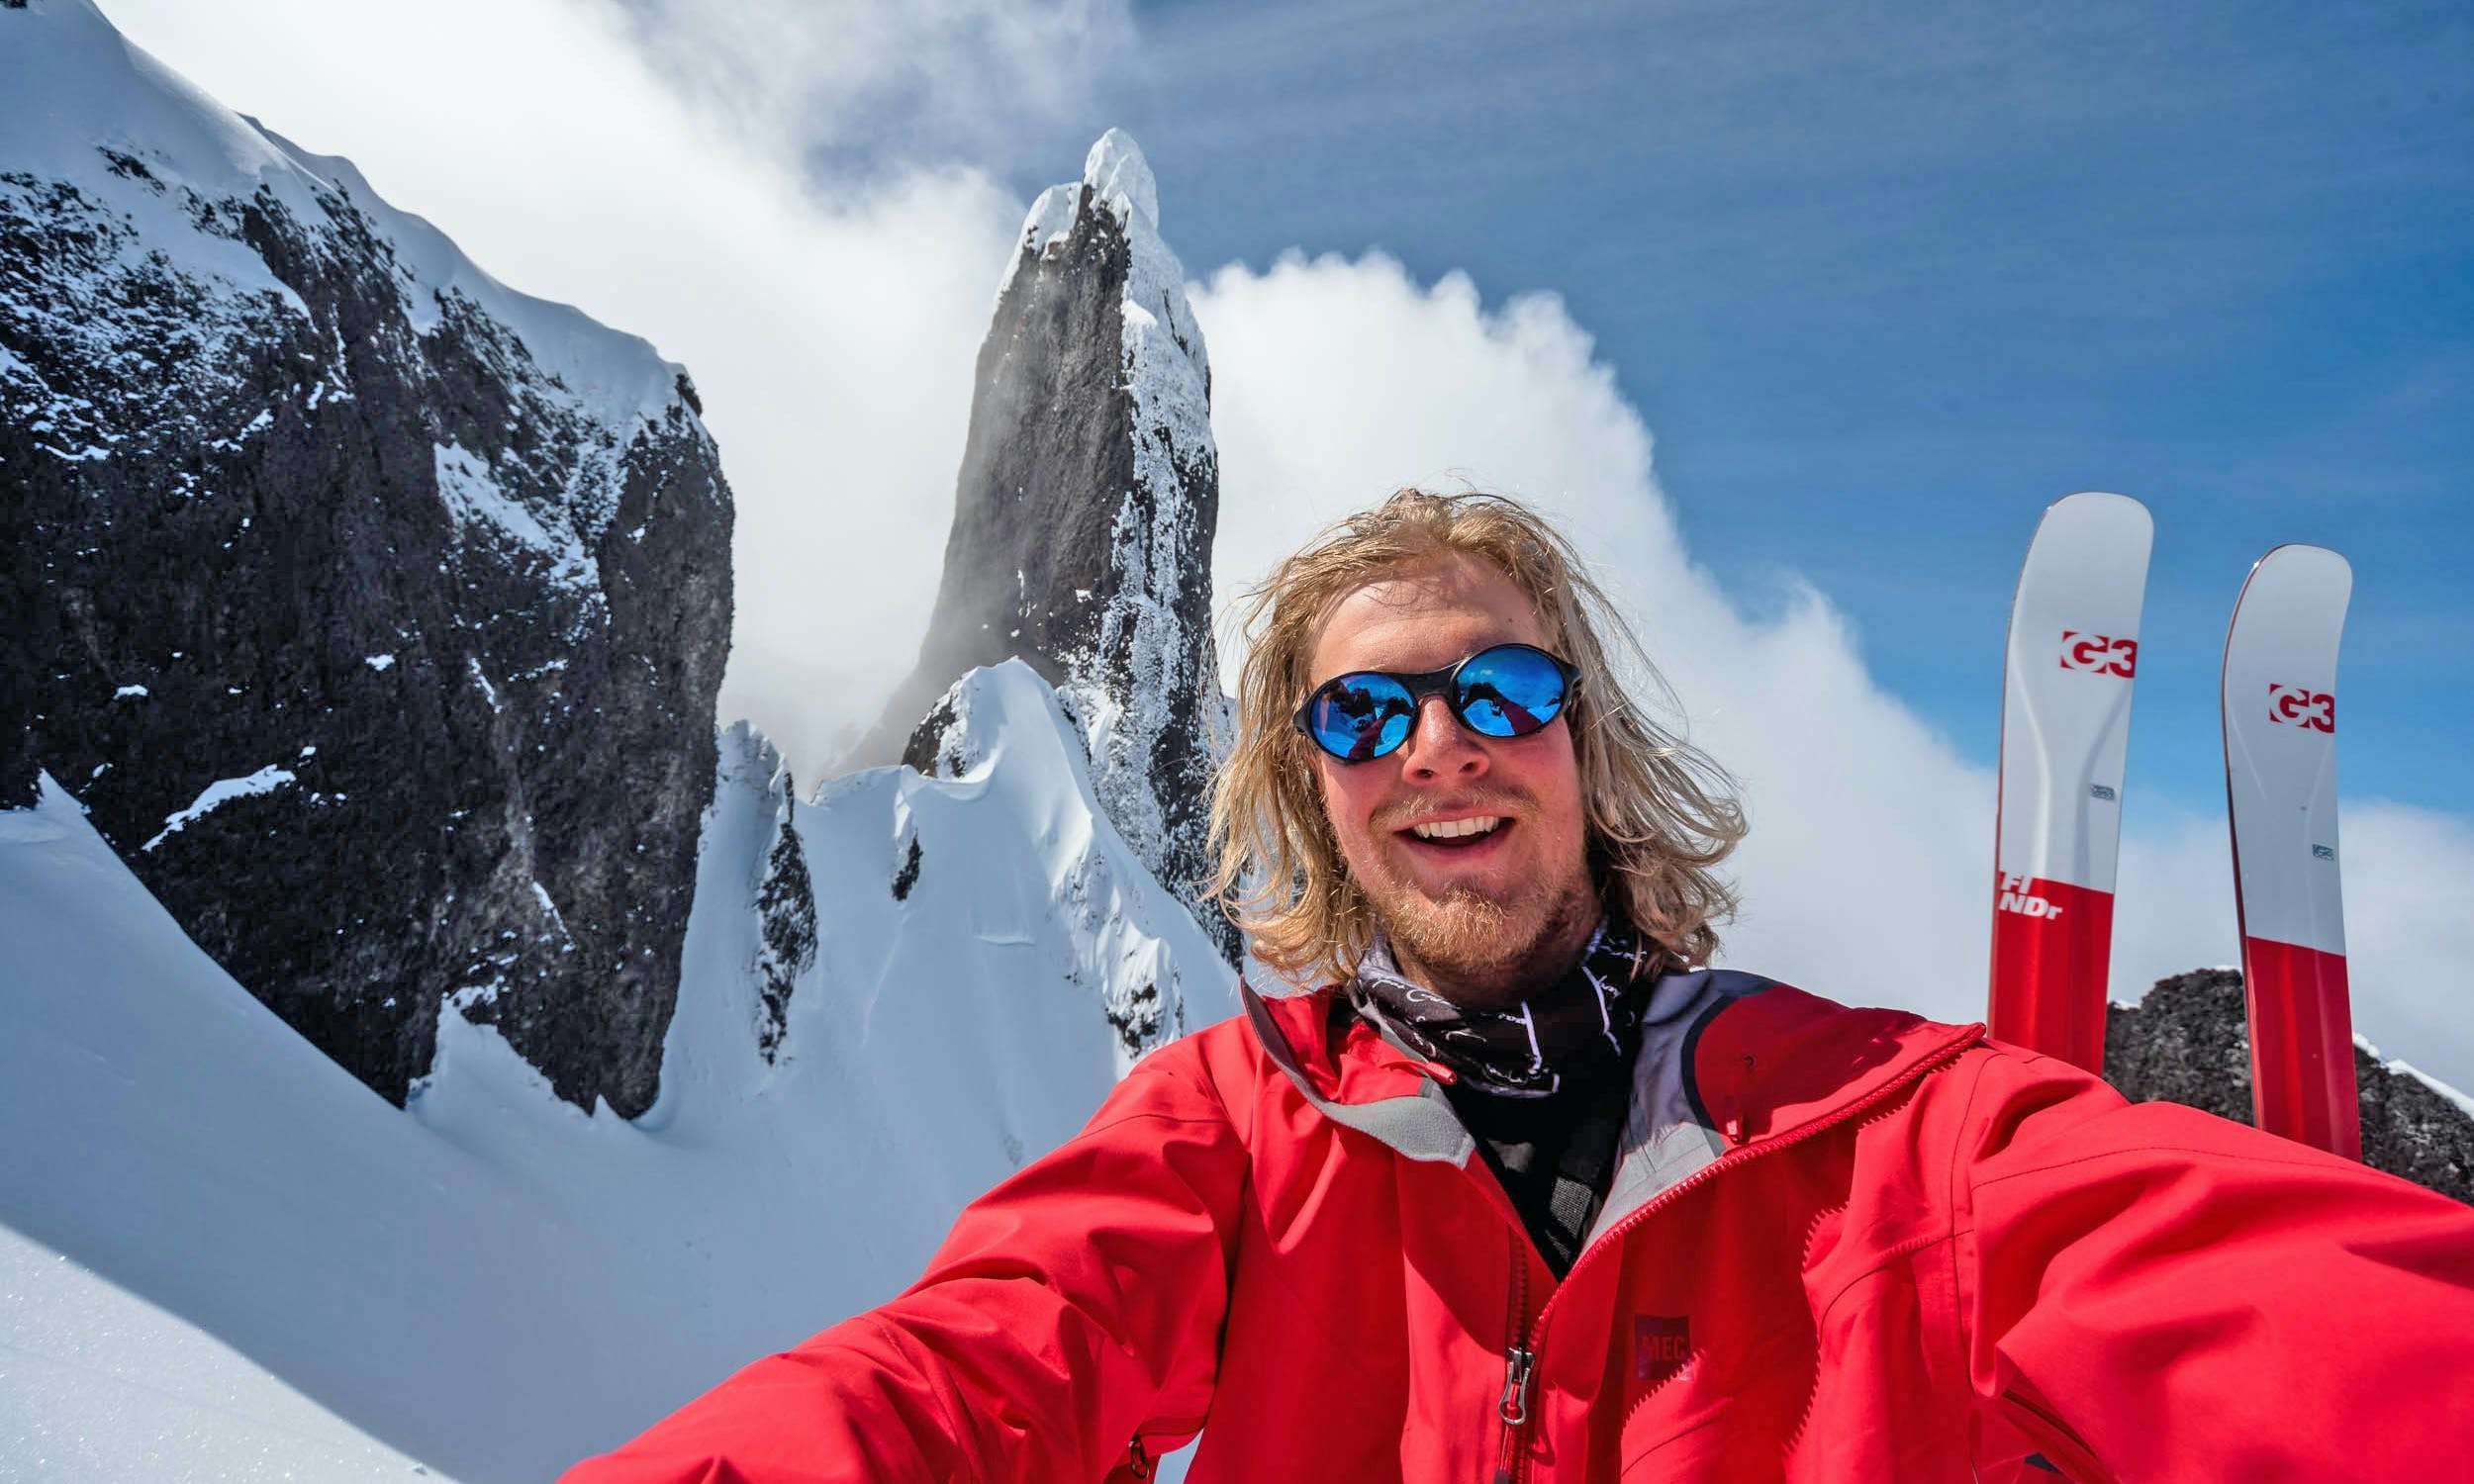 Photographer Reuben Krabbe takes a selfie, surrounded by huge snowy mountains